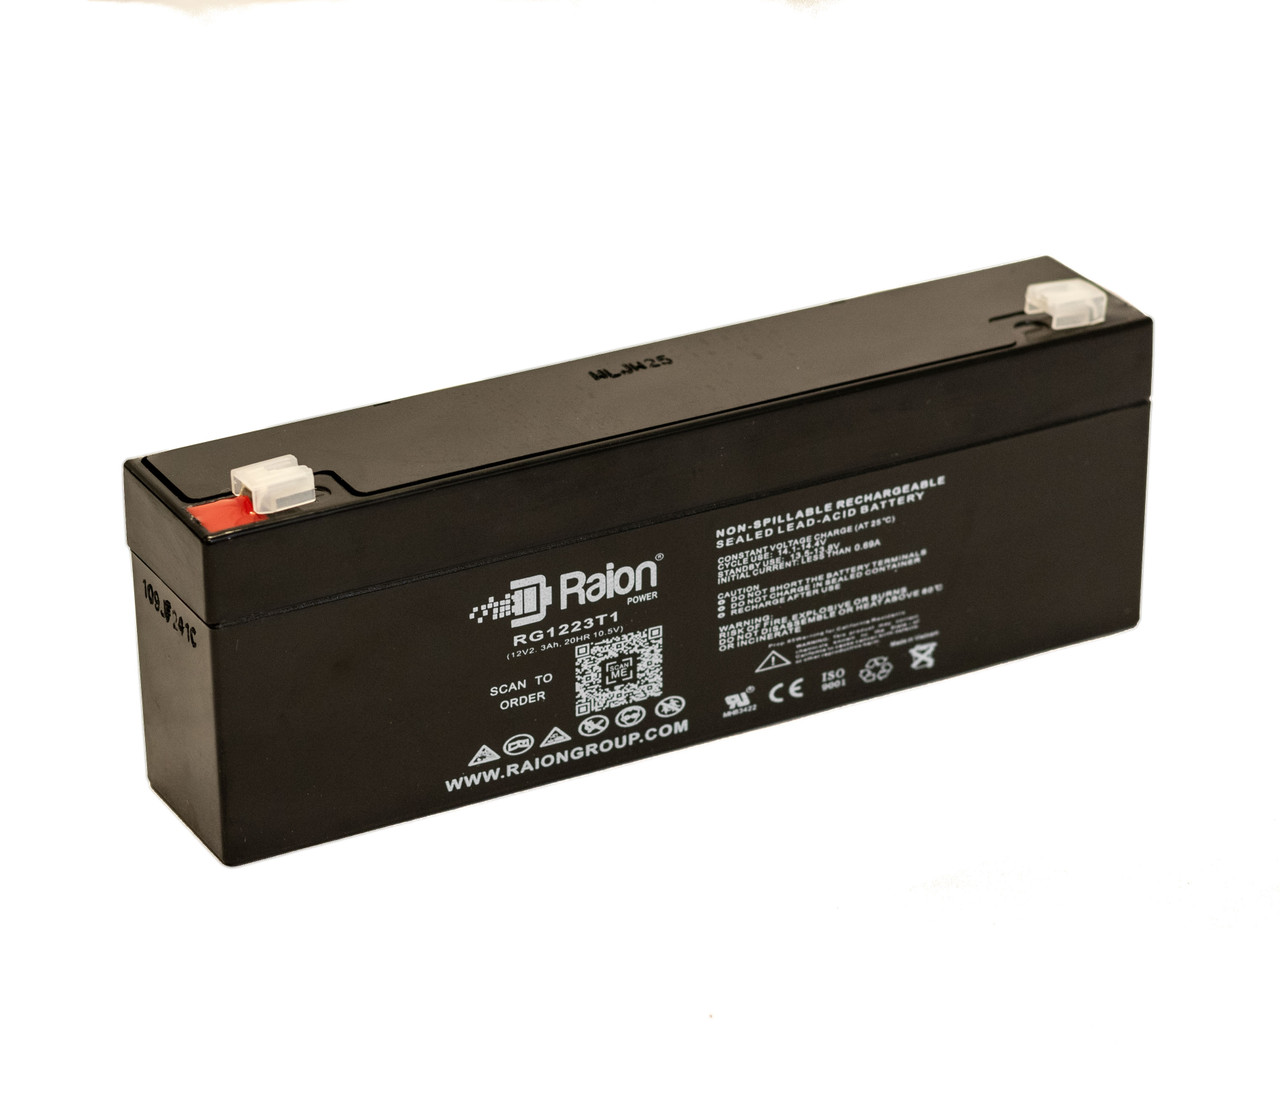 Raion Power RG1223T1 Replacement Battery for MHB MS2.3-12